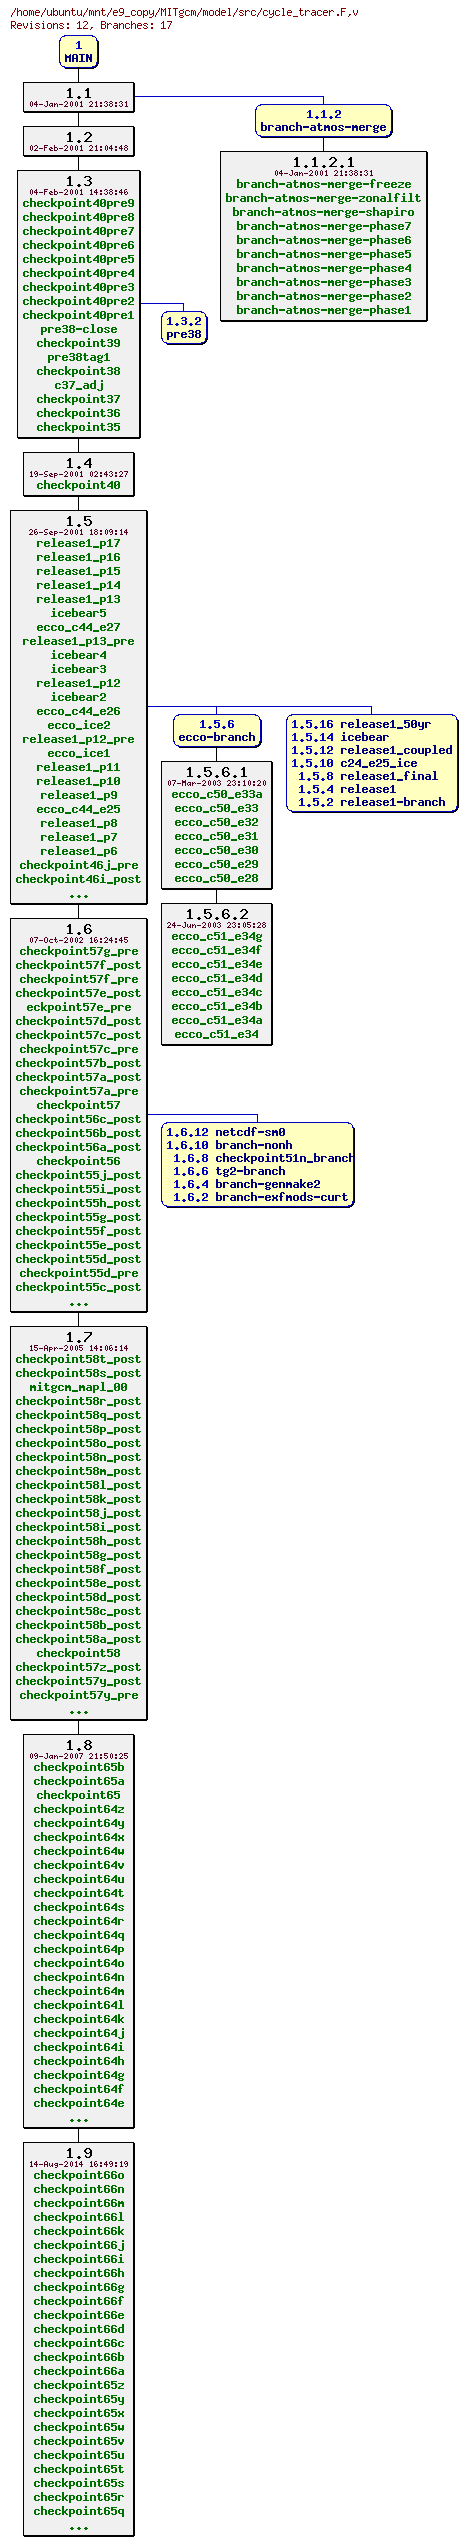 Revisions of MITgcm/model/src/cycle_tracer.F